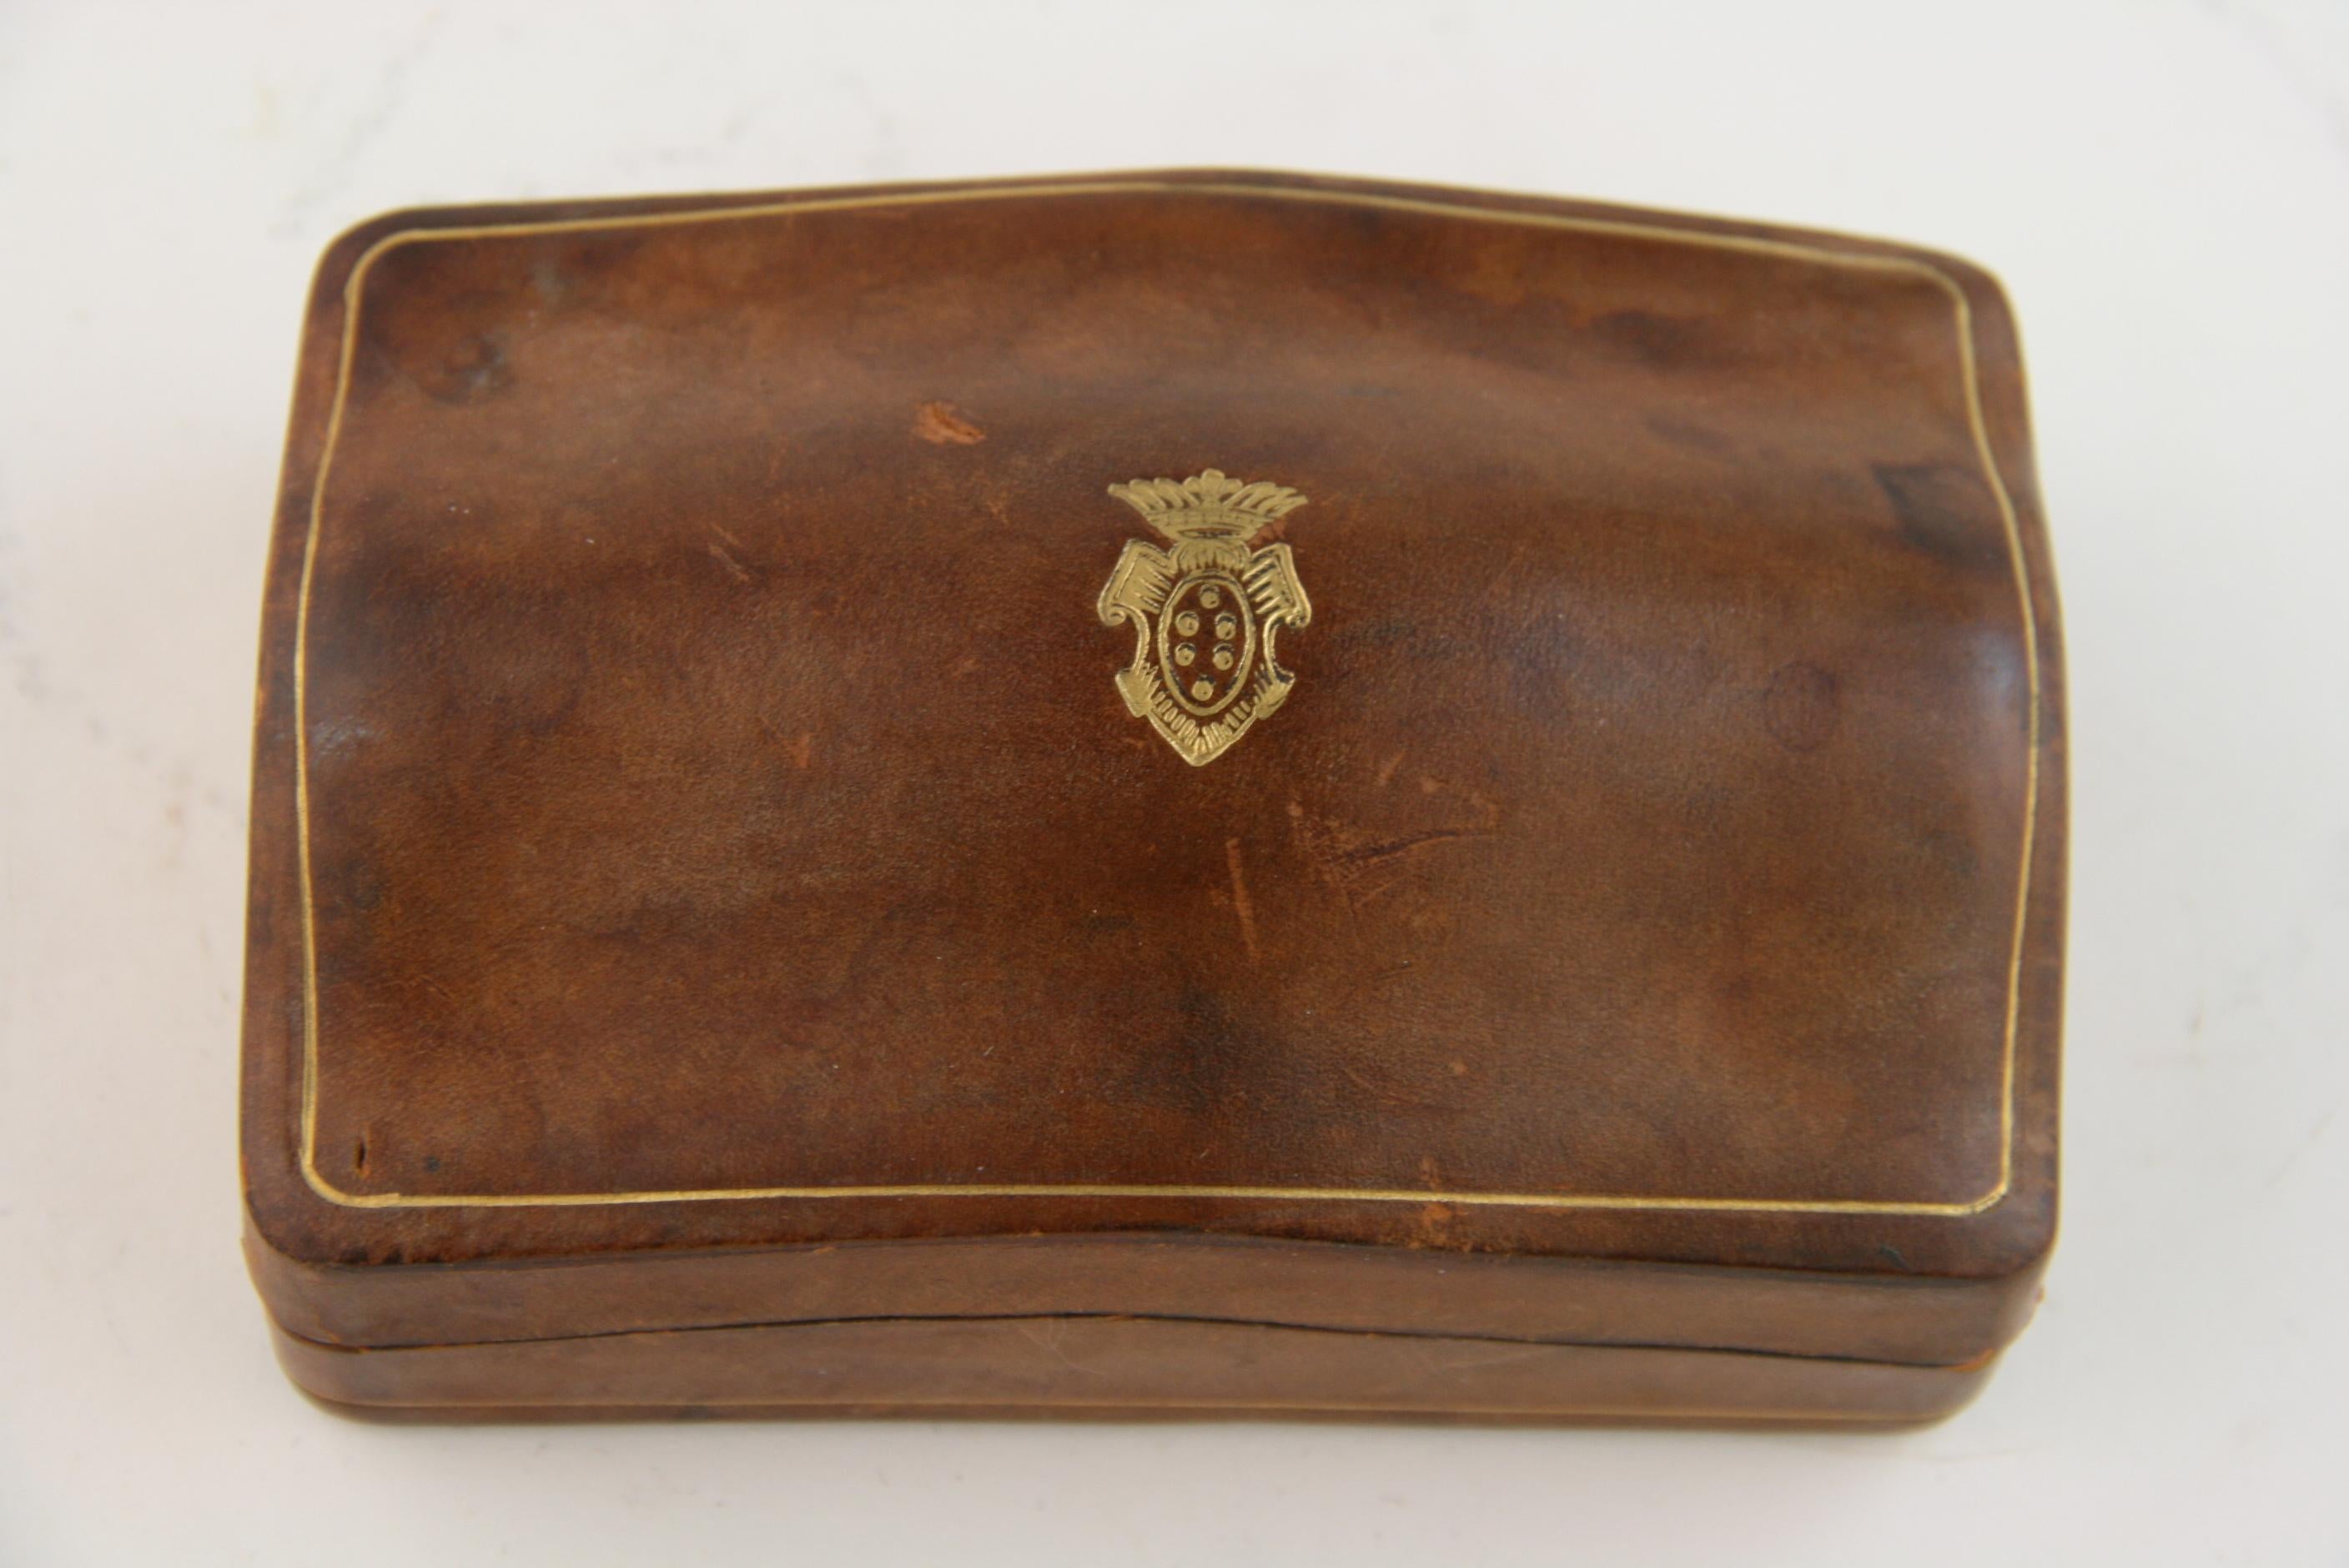 8-250 Italian handmade leather box with gold embossed edge and crest.